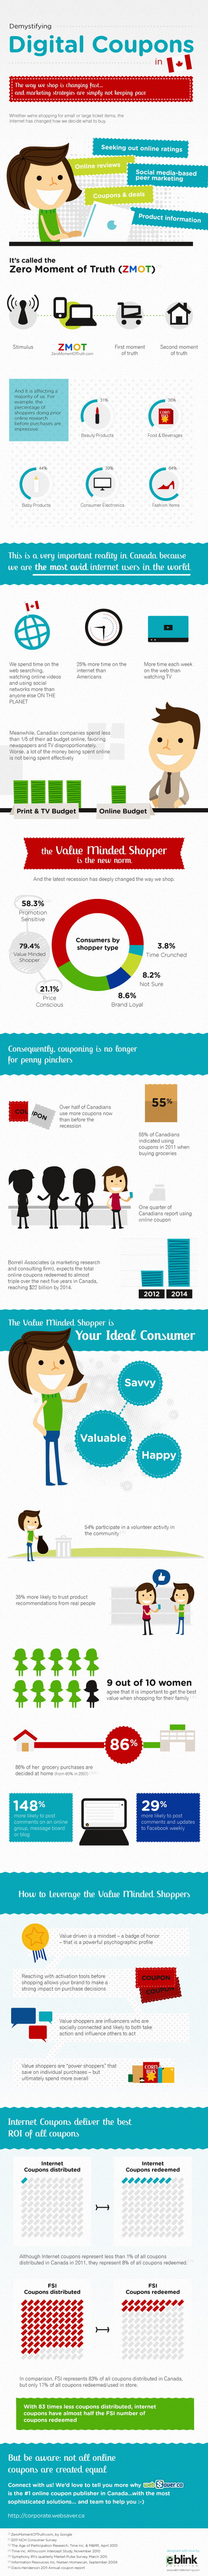 Infographic for Demistifying Online Coupon in Canada Infographic